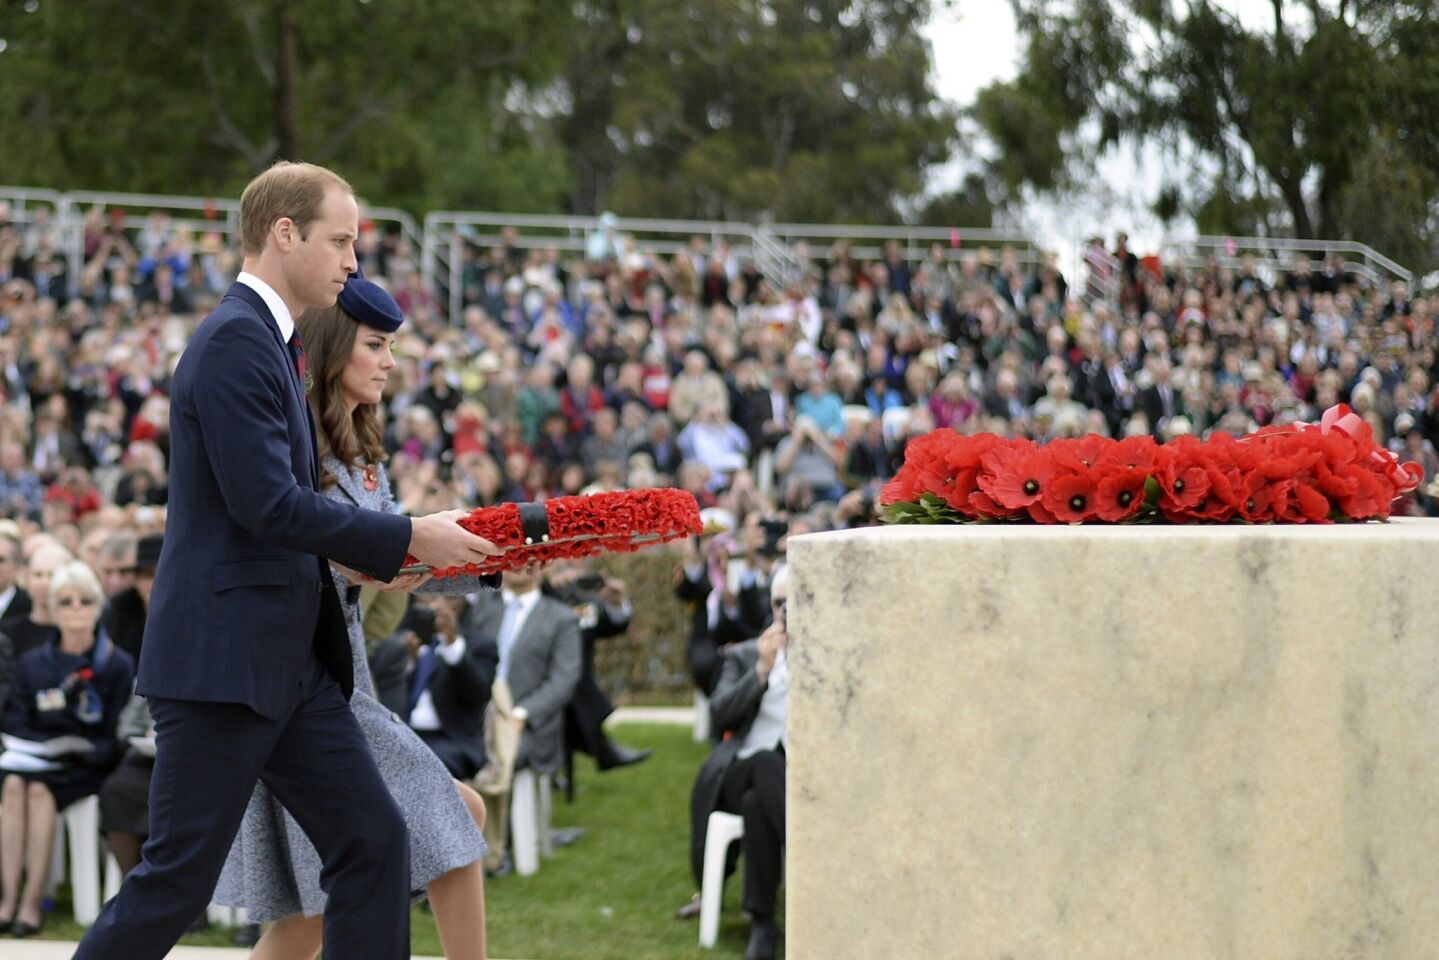 The duke and duchess of Cambridge lay a wreath as they attend the commemorative service during the Anzac Day ceremony at the Australian War Memorial in Canberra. Anzac Day is a national day of remembrance in Australia and New Zealand commemorates all Australians and New Zealanders who served in the military.